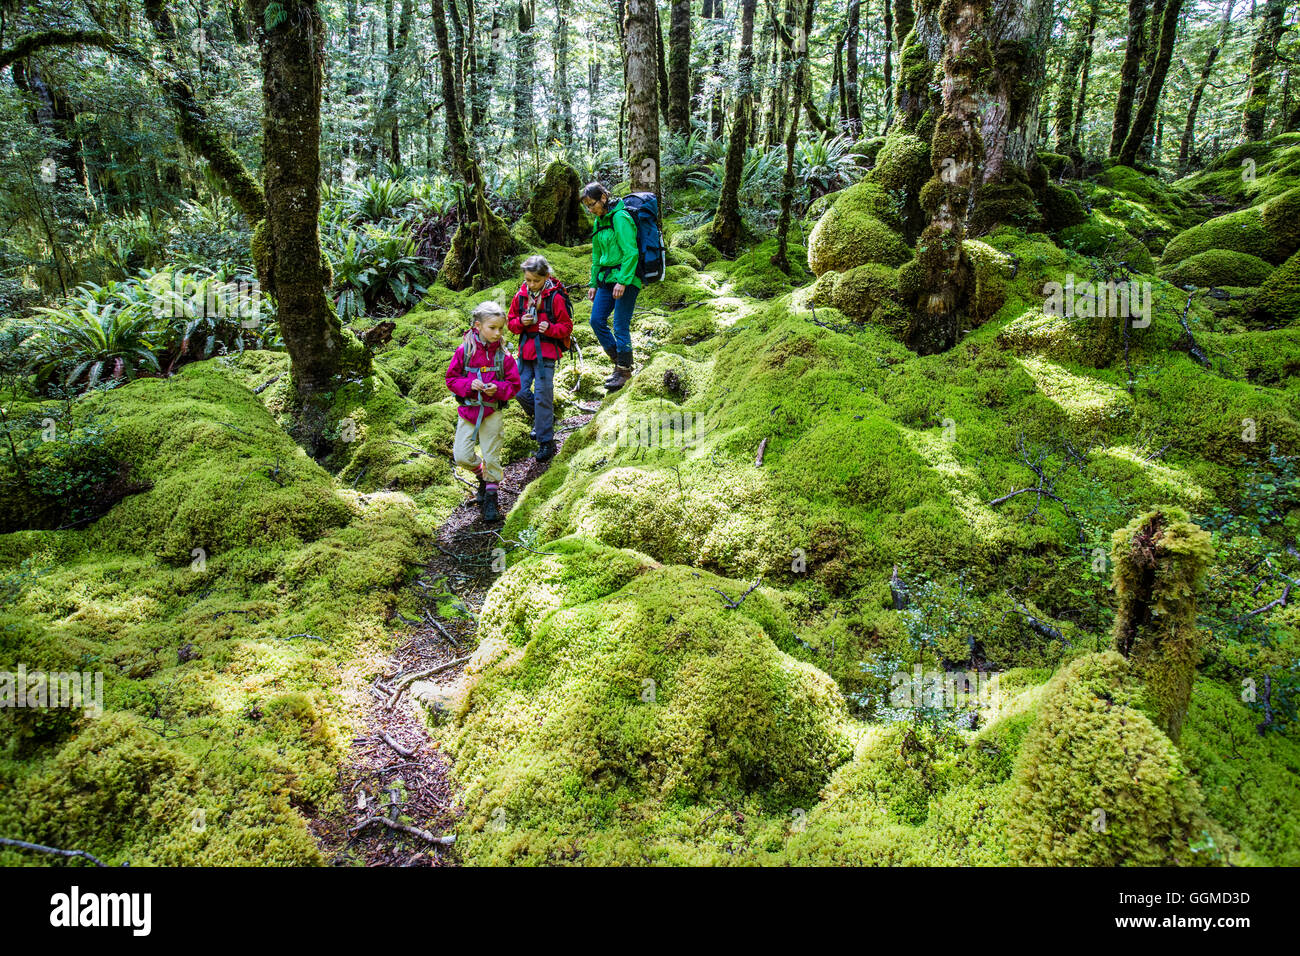 Two girls and a woman hiking through ferns in the rainforest of Fjordland at Lake Manapouri, Hope Arm, South Island, New Zealand Stock Photo